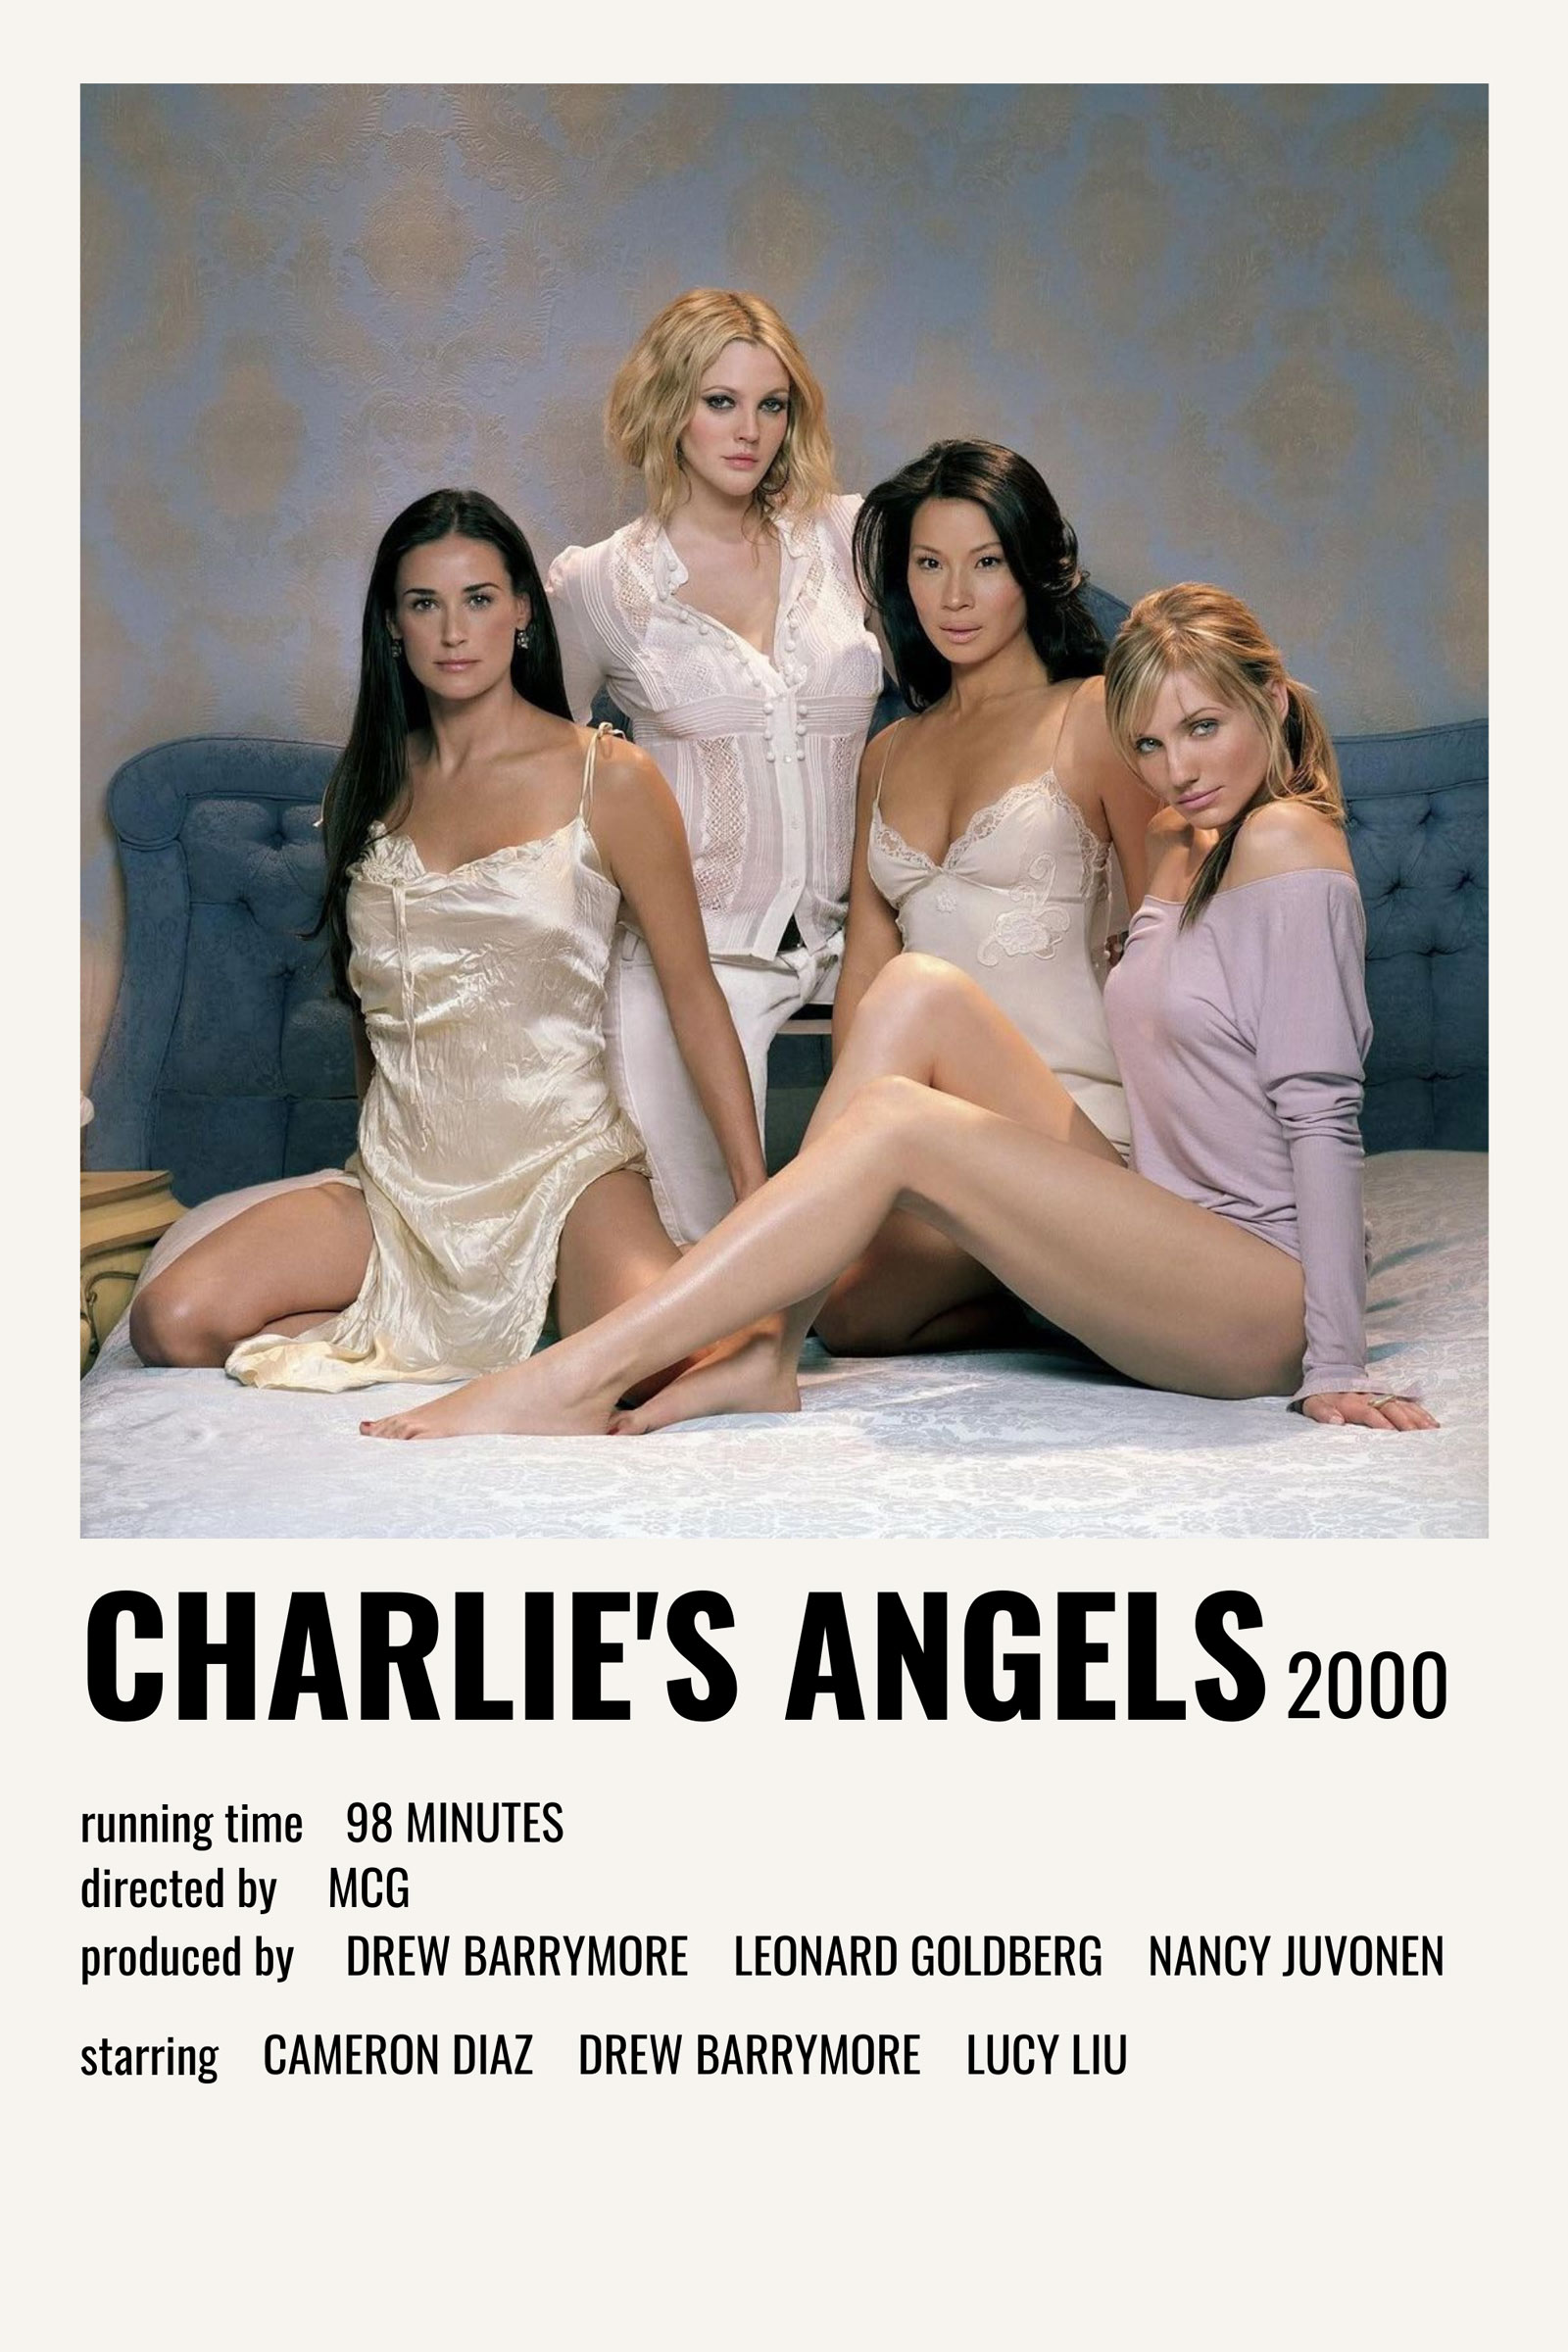 charlies-angels-2000-aesthetic-movie-poster